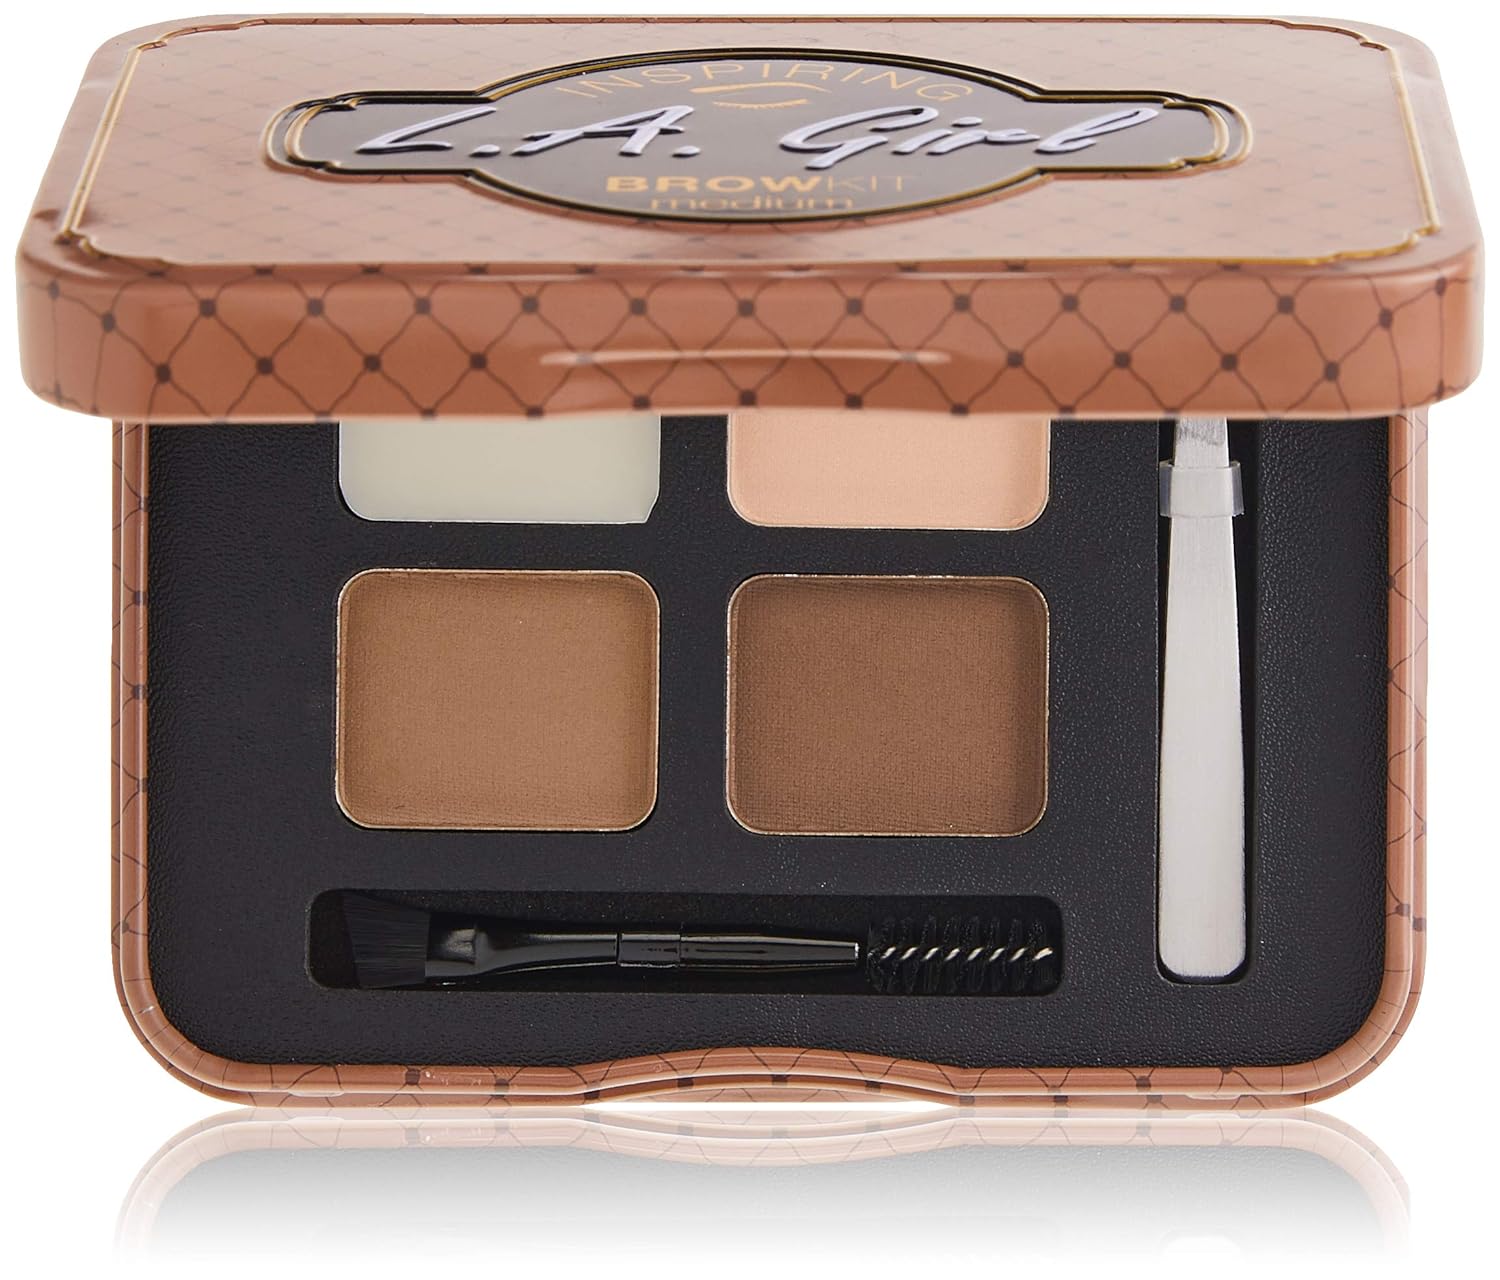 L.A. Girl Inspiring Brow Kit, Medium and Marvelous (Medium), Brow Wax 0.035 ., Brow Powder 0.15 ., Includes Tweezers and Dual Ended Brush with Spoolie